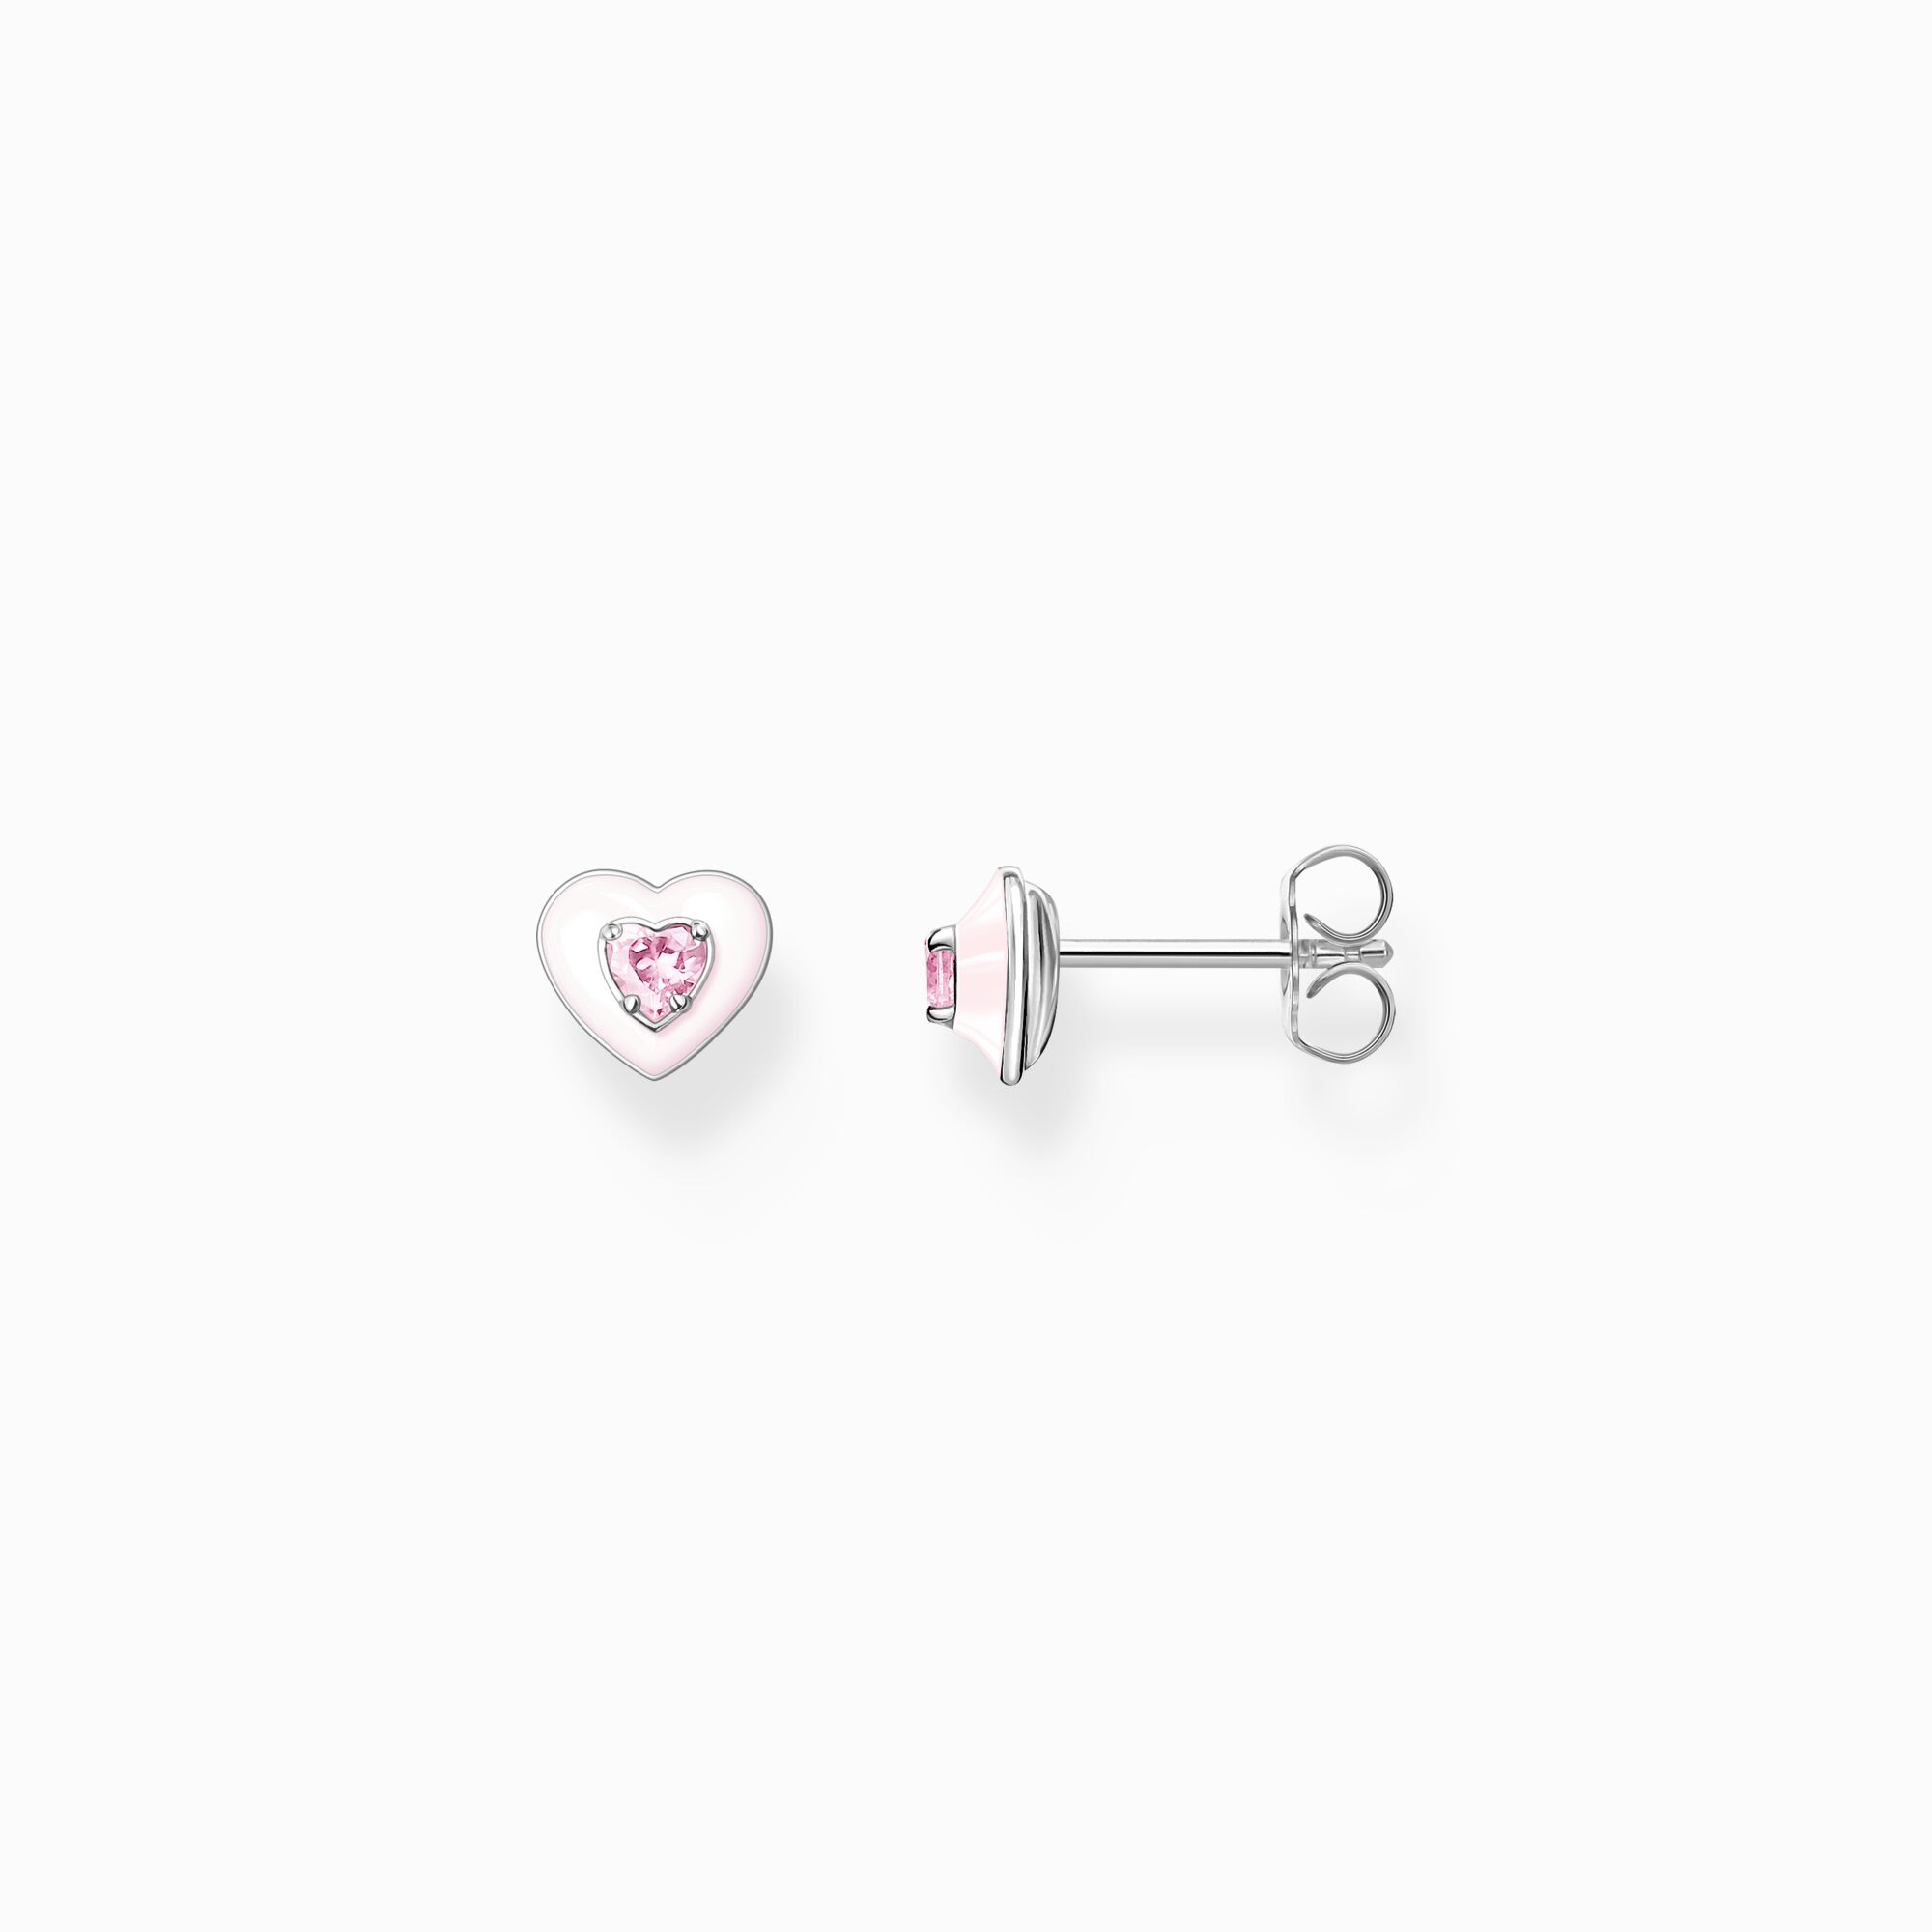 Ear studs heart with pink stones silver from the Charming Collection collection in the THOMAS SABO online store